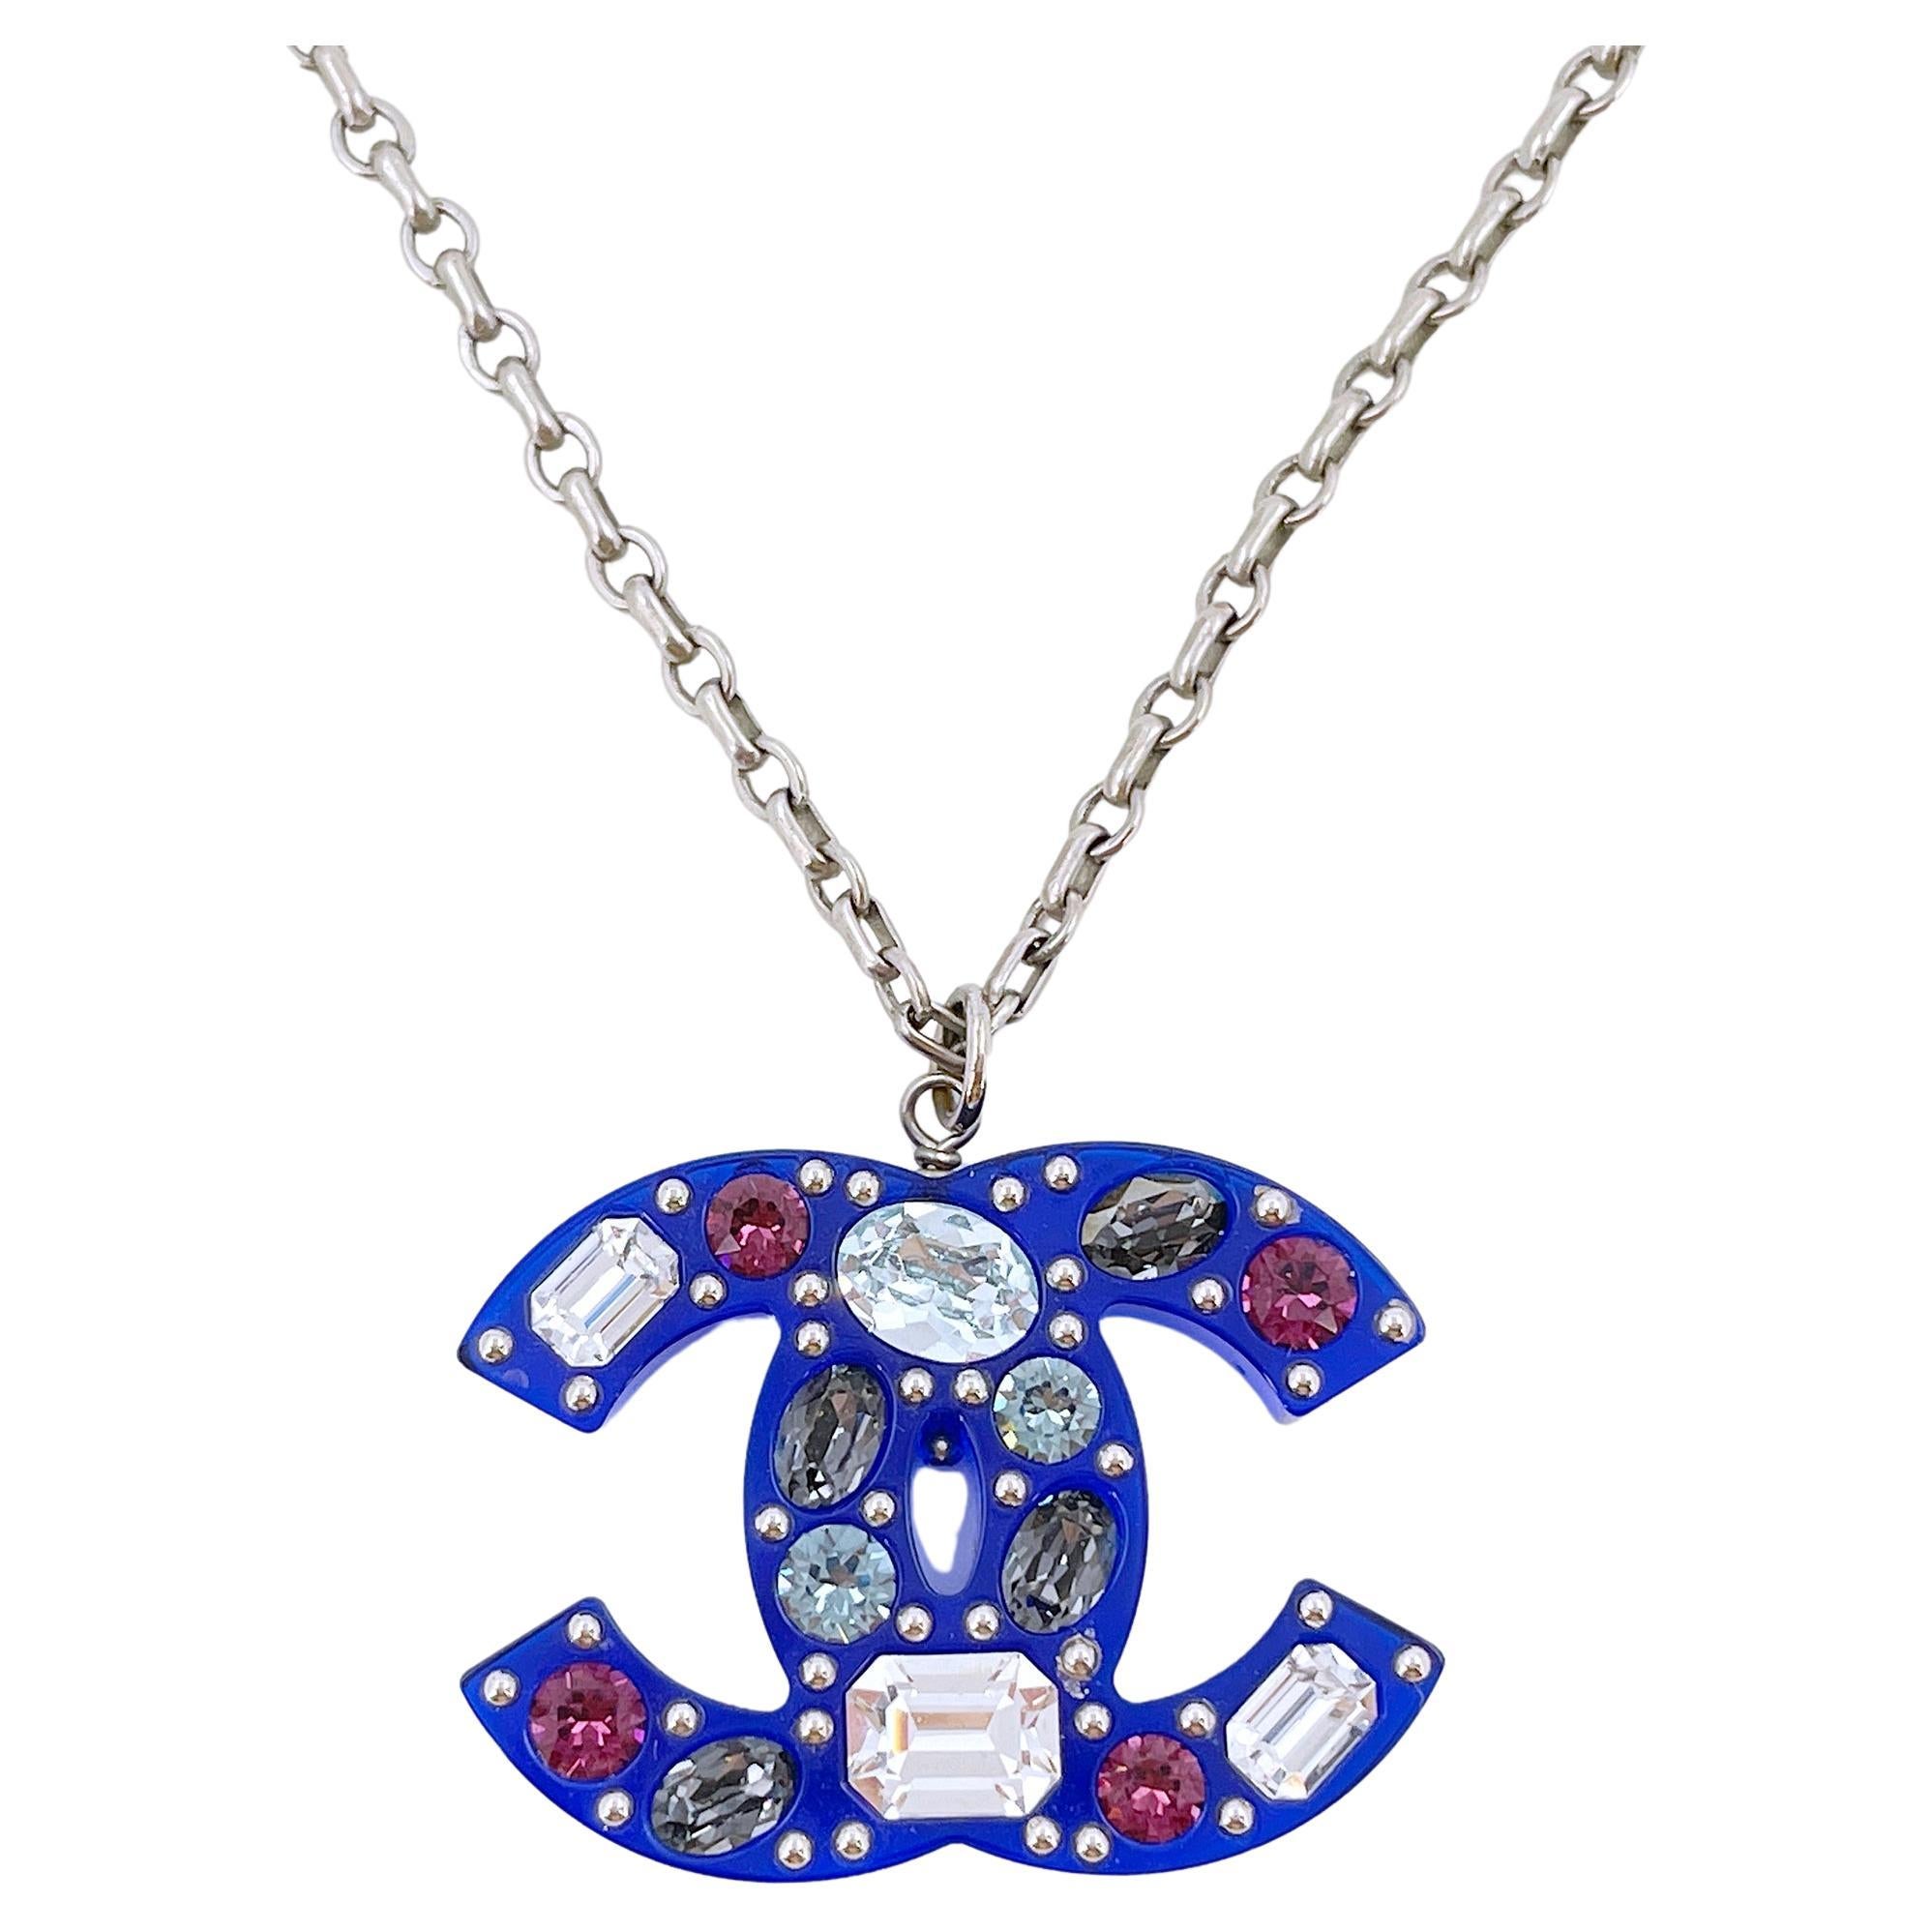 Chanel logo charms necklace - Gem